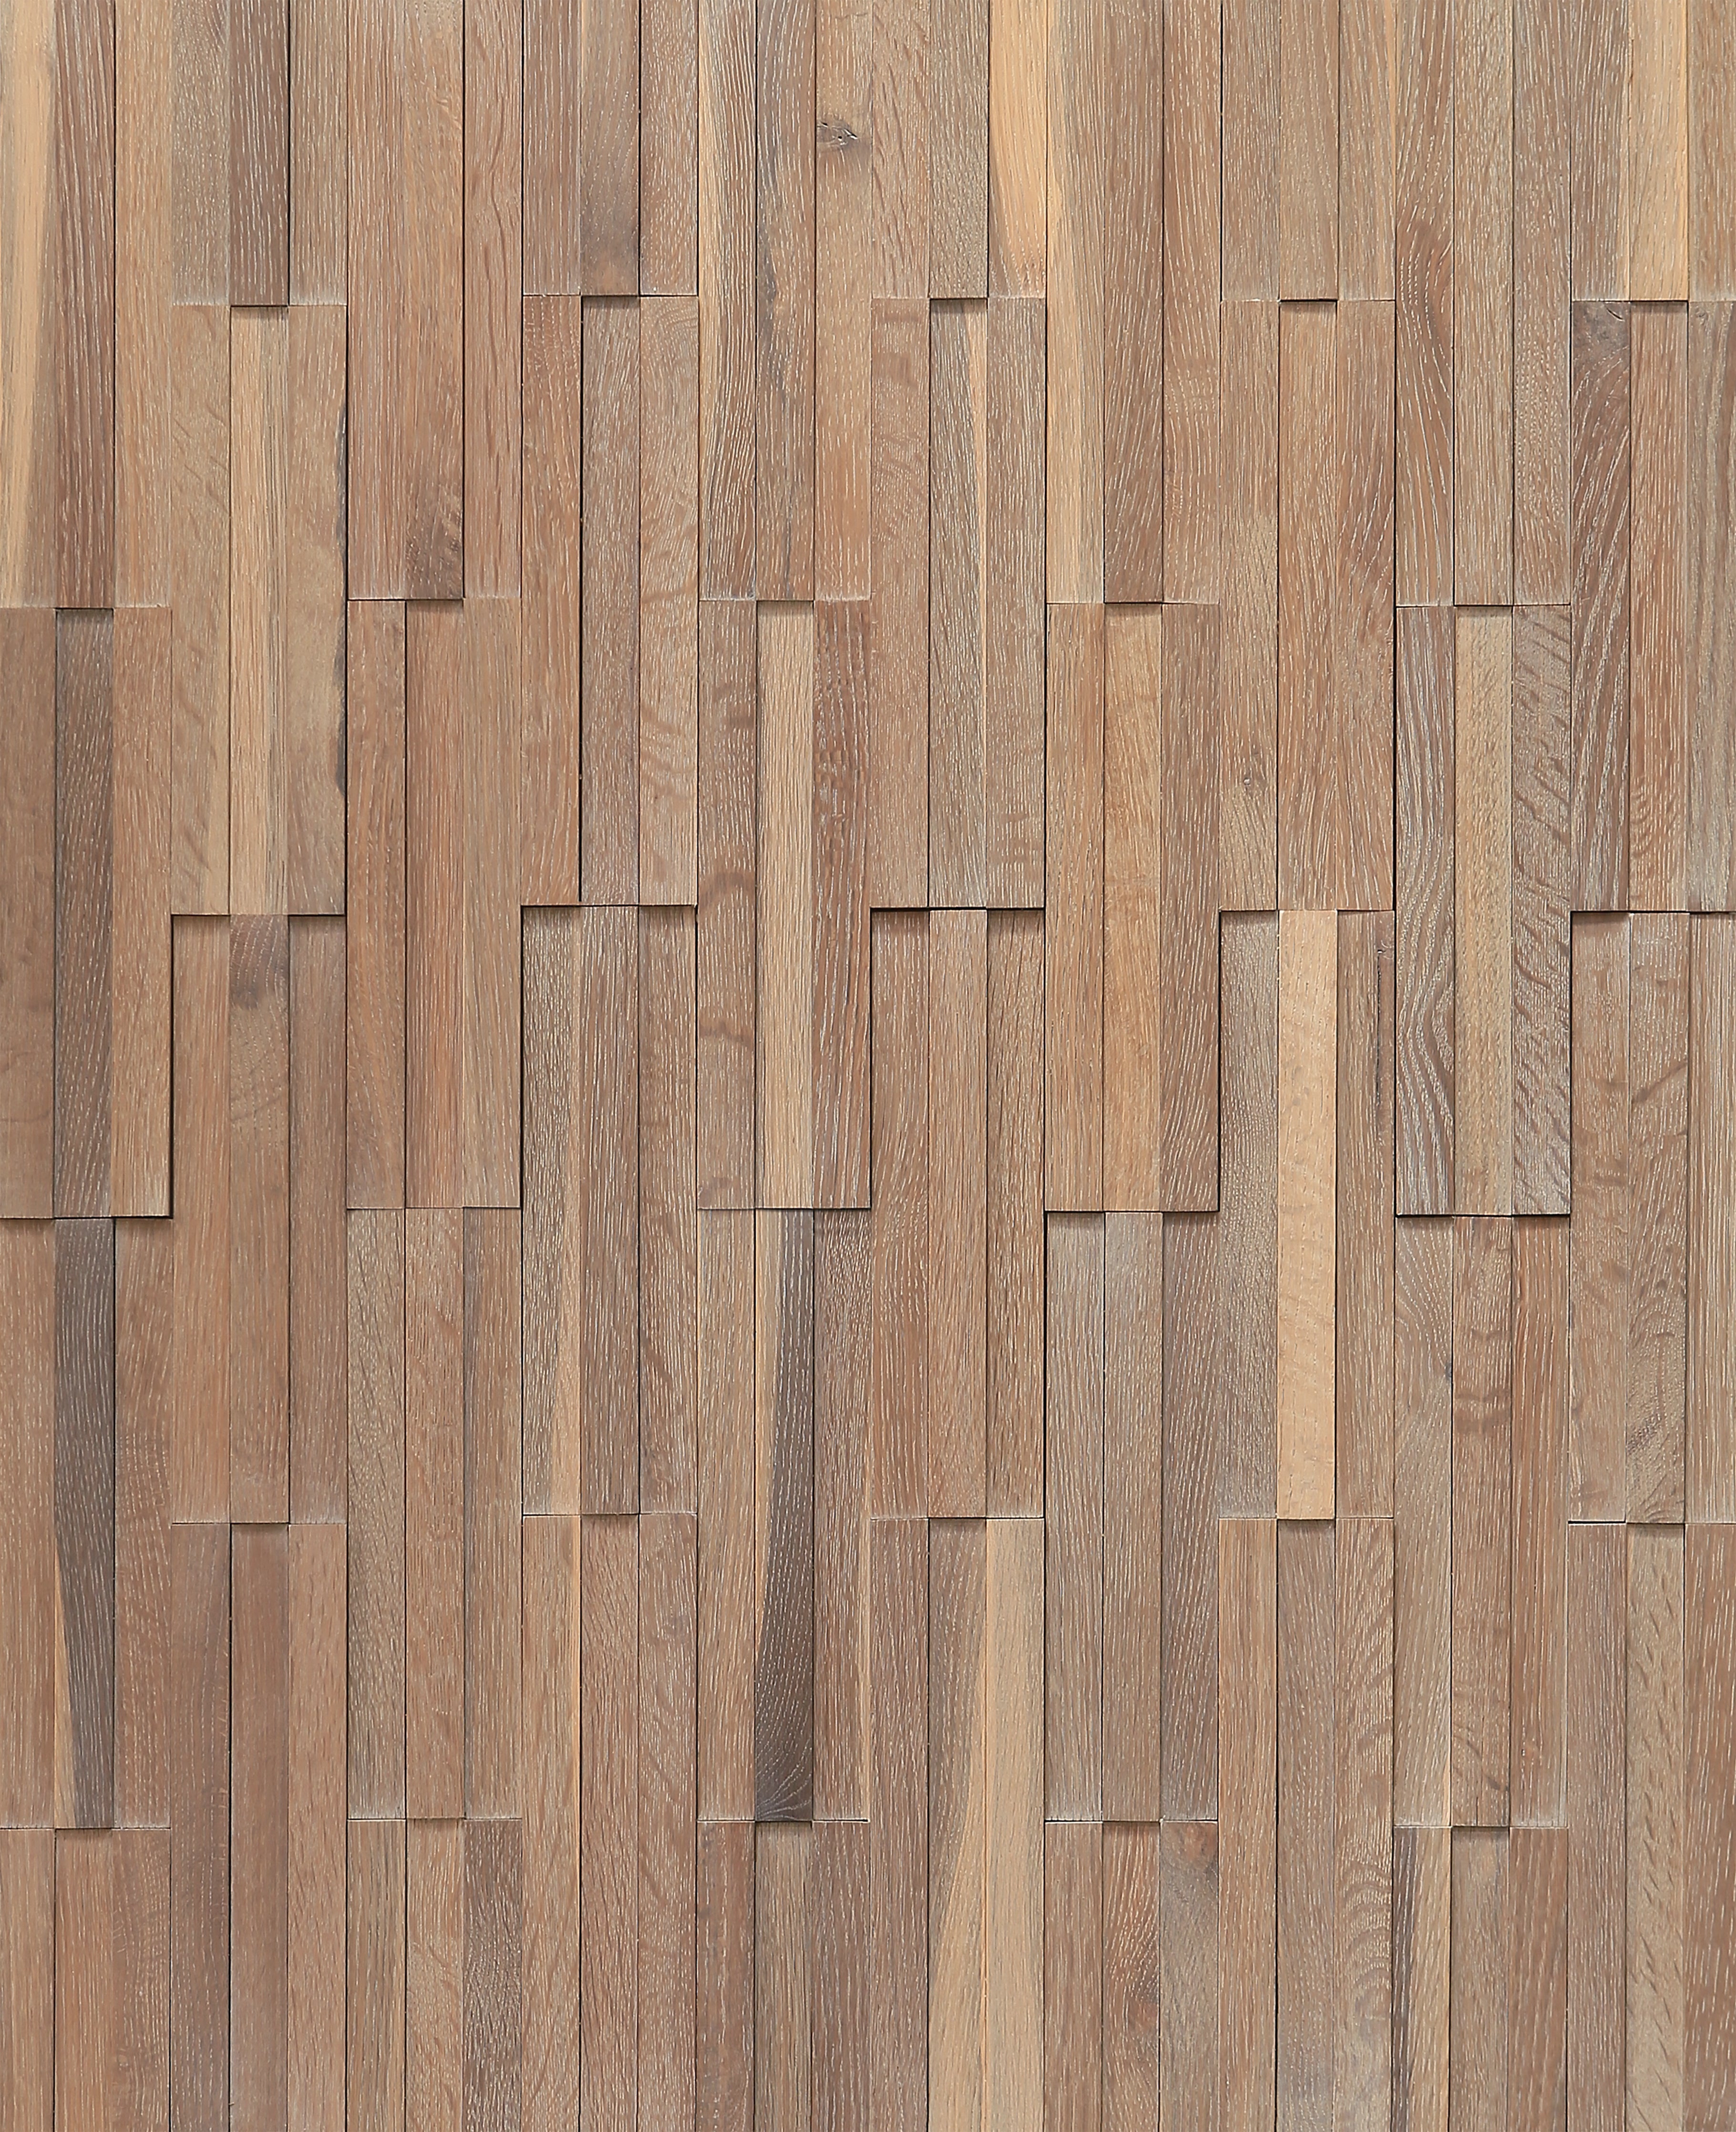 duchateau inceptiv kuadra lugano oak three dimensional wall natural wood panel matte lacquer for interior use distributed by surface group international